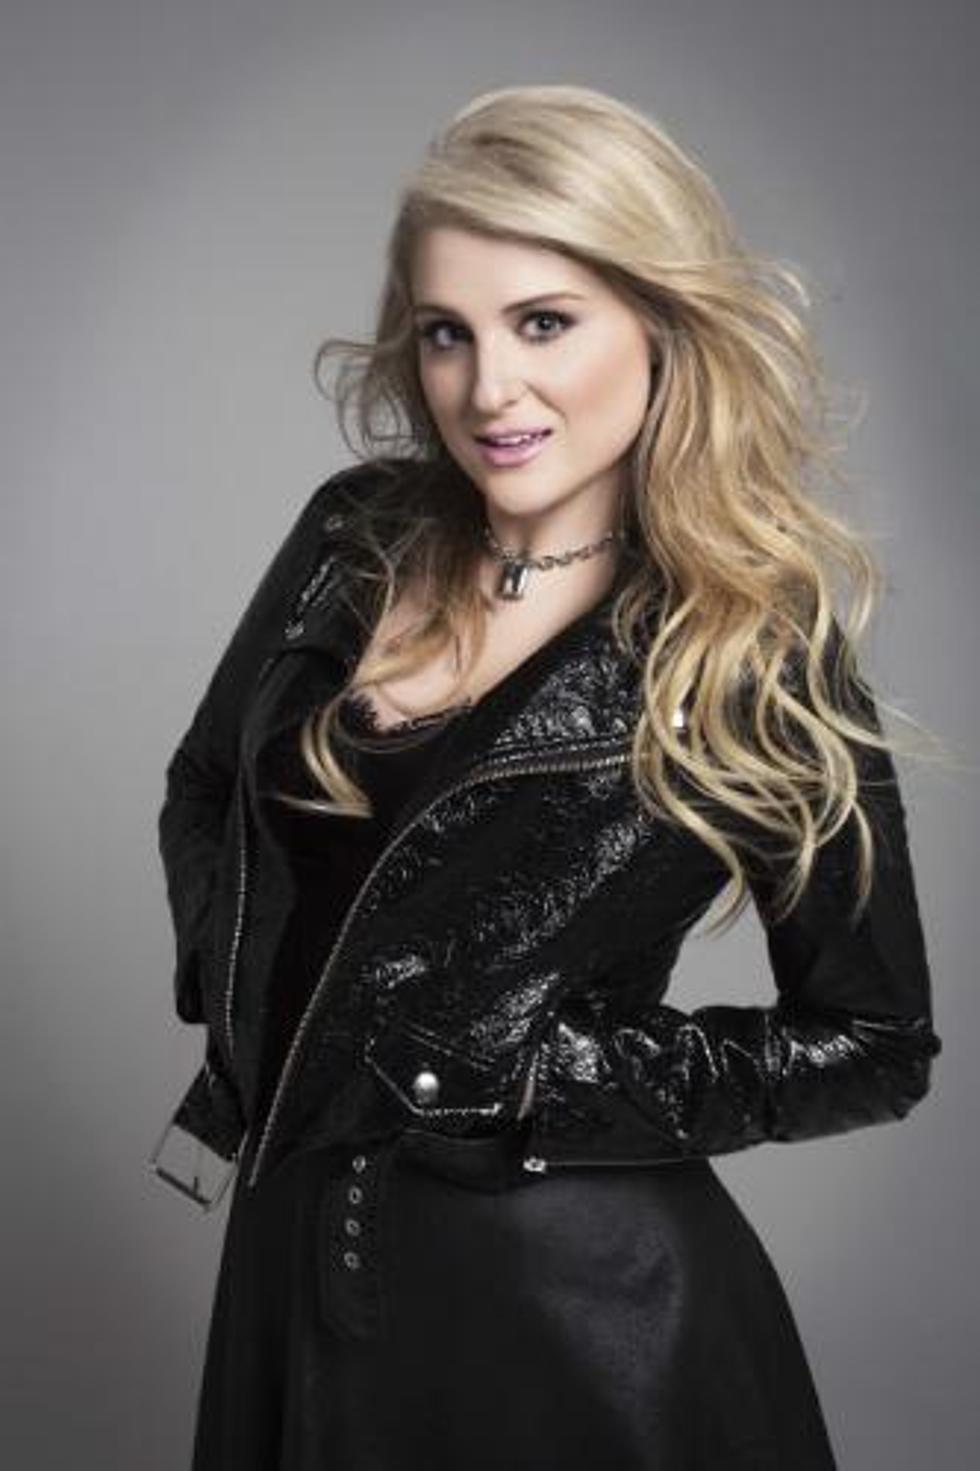 Meghan Trainor Does Title Track for Epic Records’ First Holiday EP ‘I’ll Be Home For Christmas’